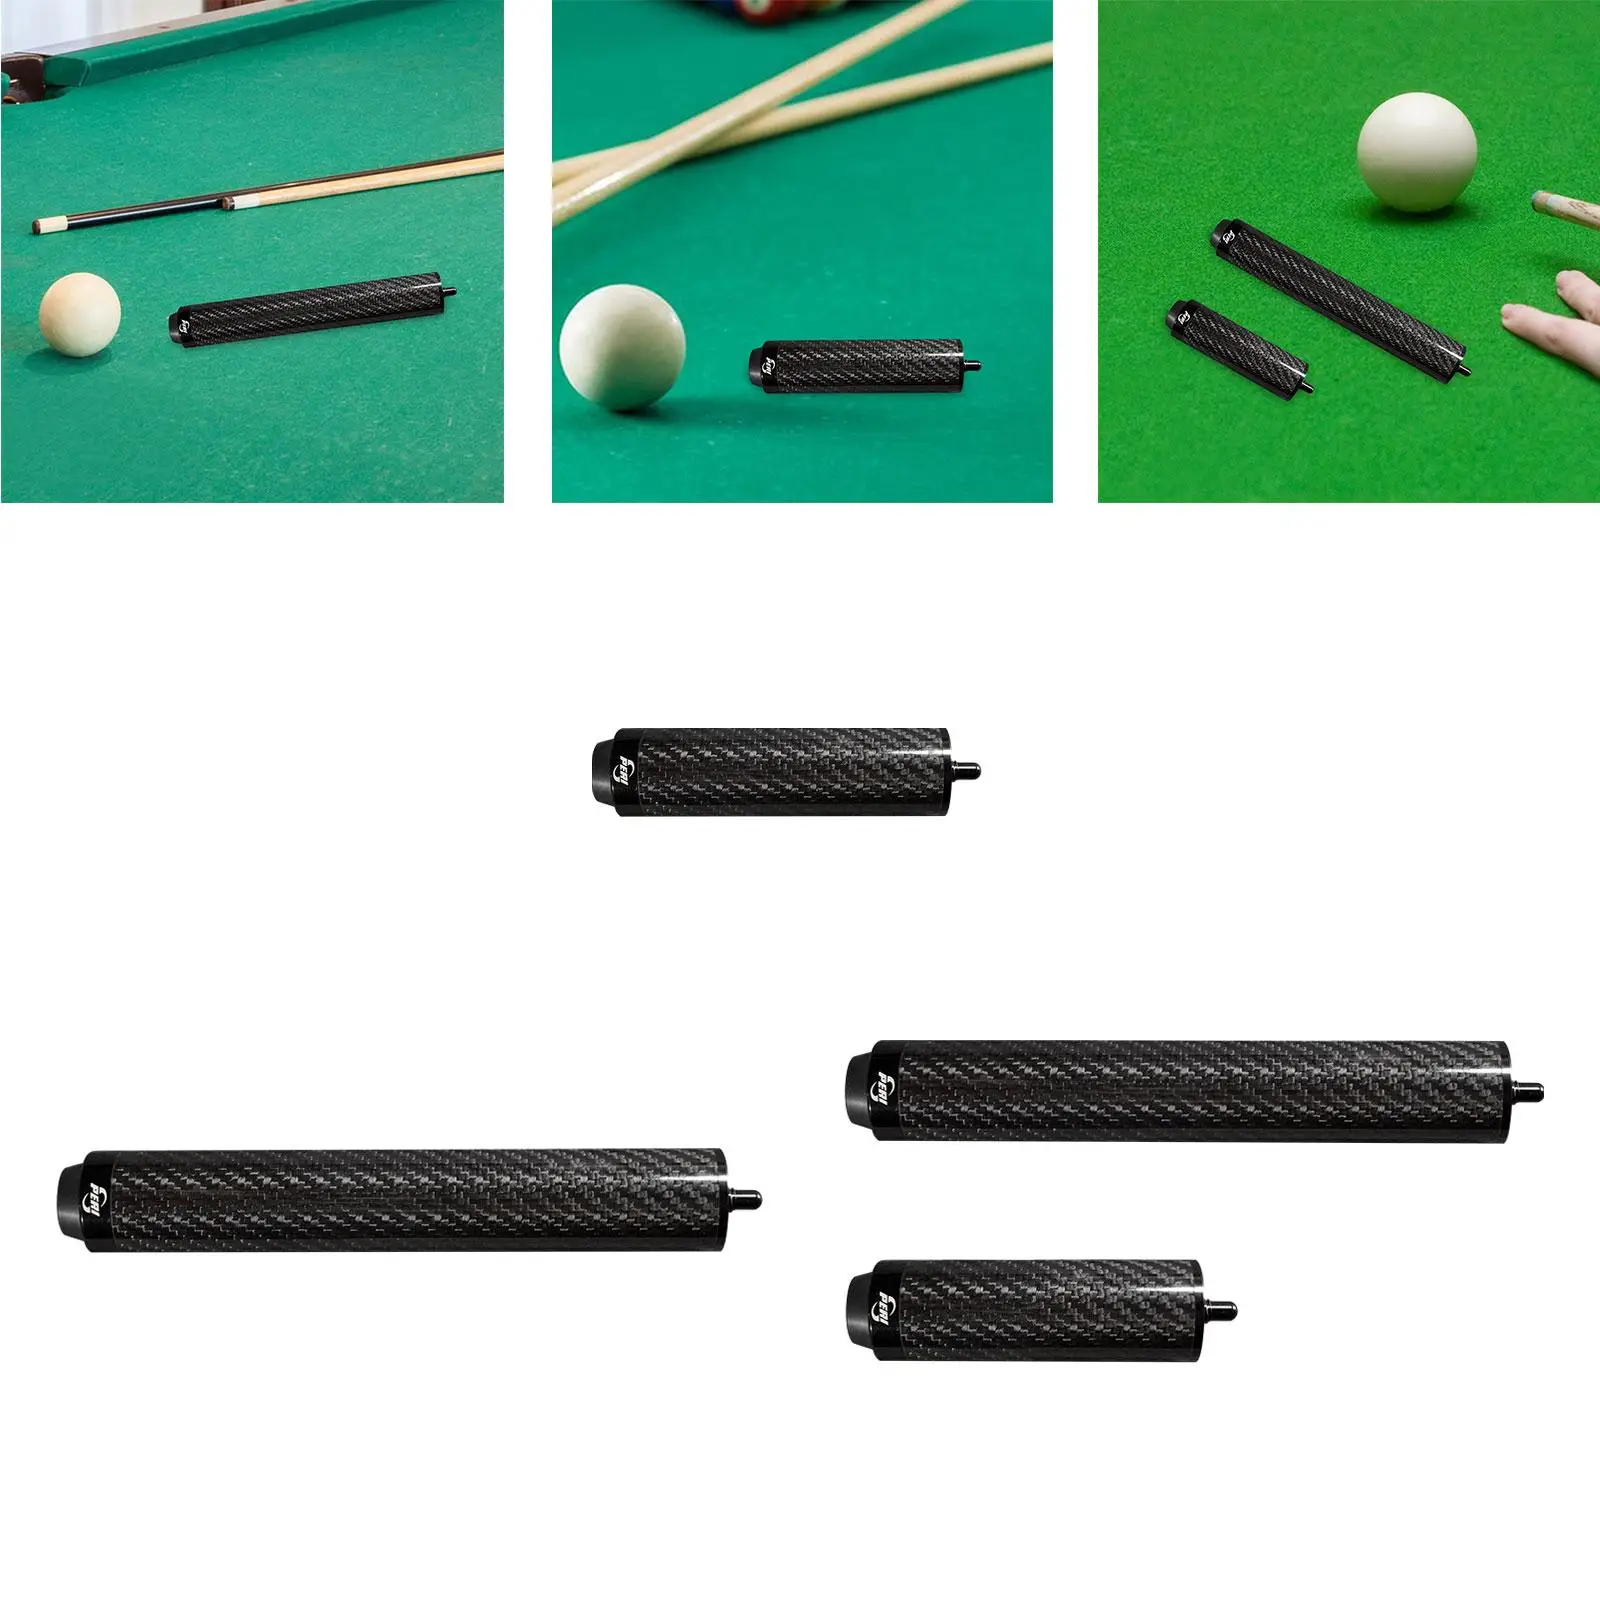 Billiards Pool Cue Extension Compact Attachment Pool Cue Weight Screw Cue Stick